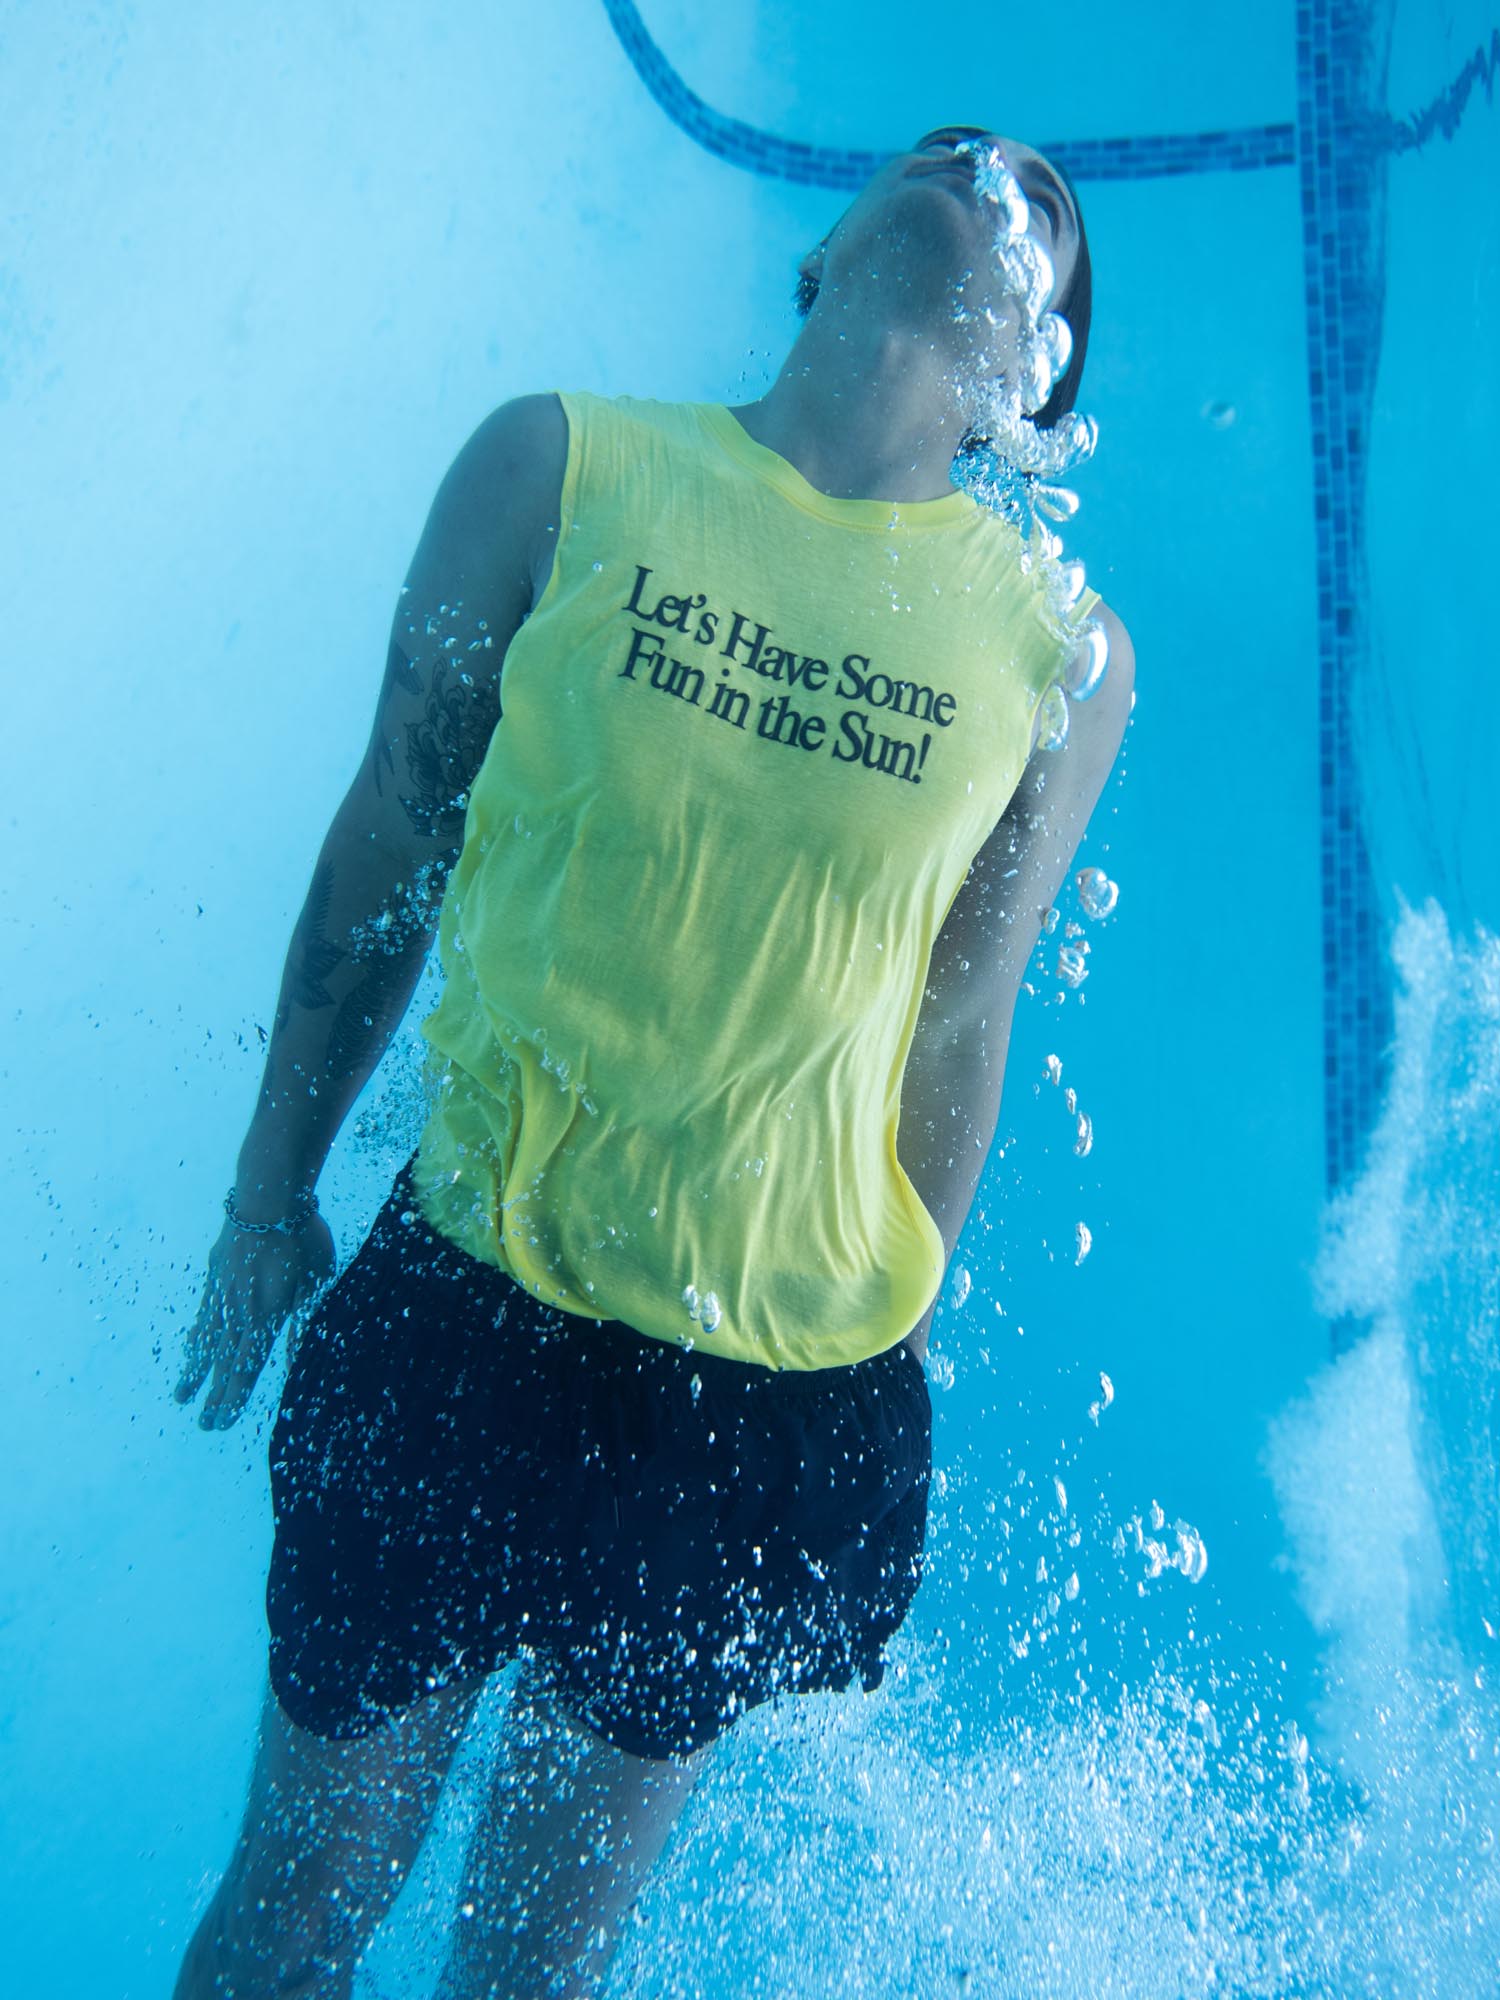 A man in a yellow tank top poses underwater